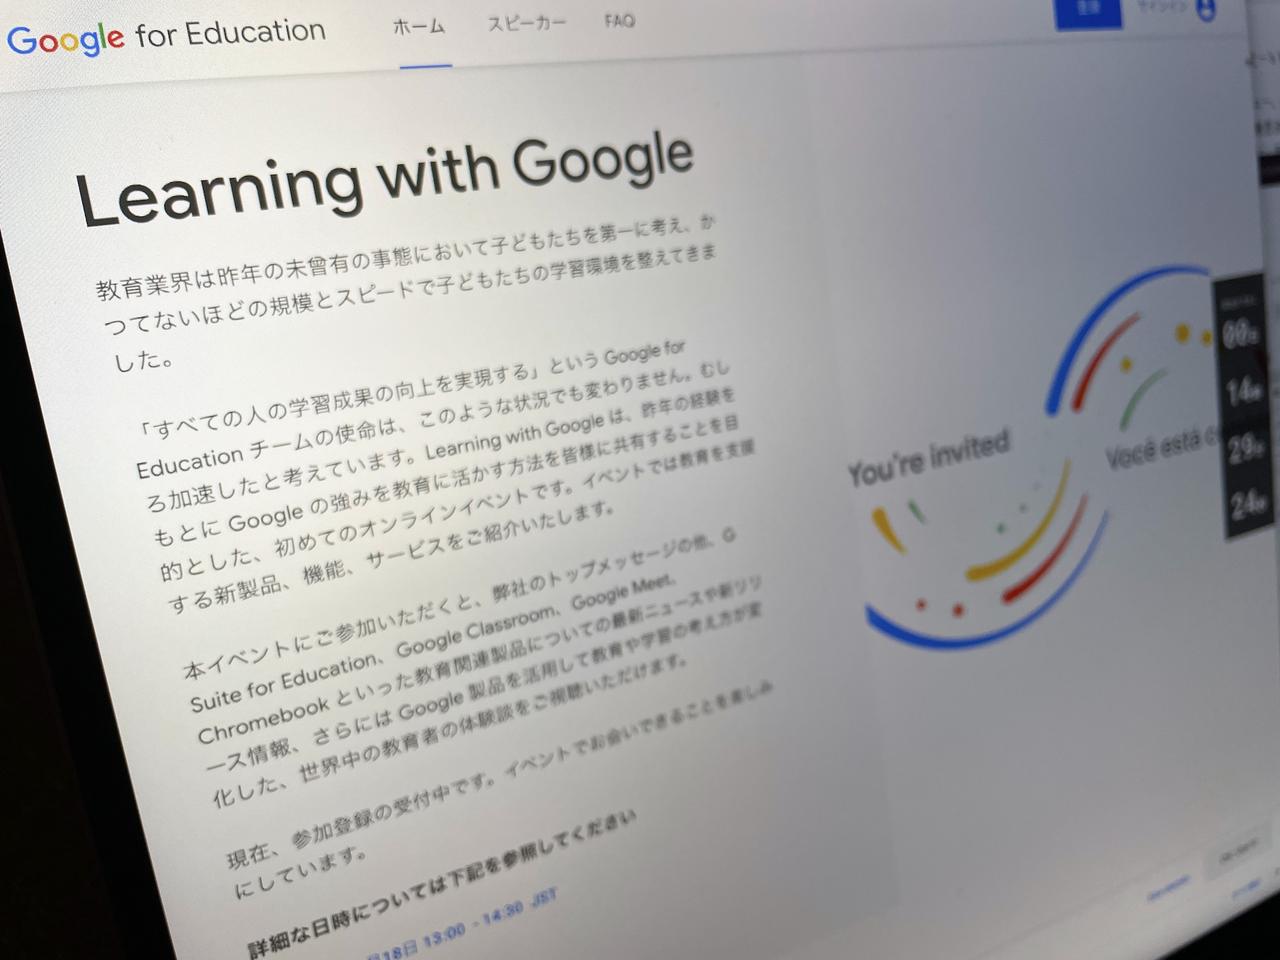 Learning with Google